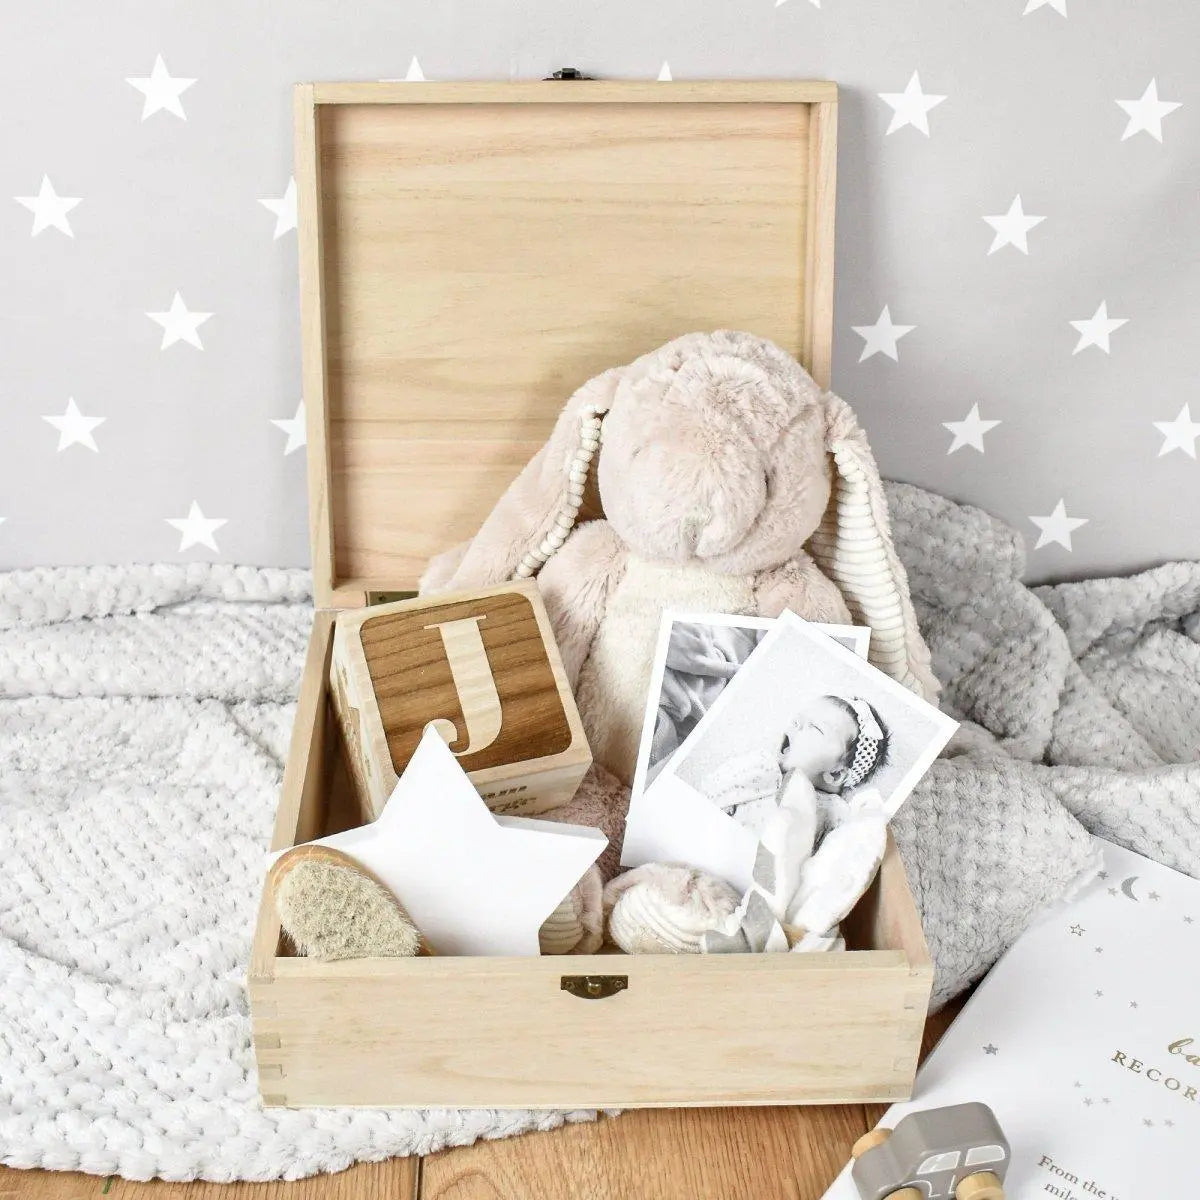 Personalised Wooden Baby Box, Engraved Baby Box, Baby Memory Box, Newborn Keepsake Box, Birth Stats Gift, Welcome Baby Box, New Baby Gift - Amy Lucy